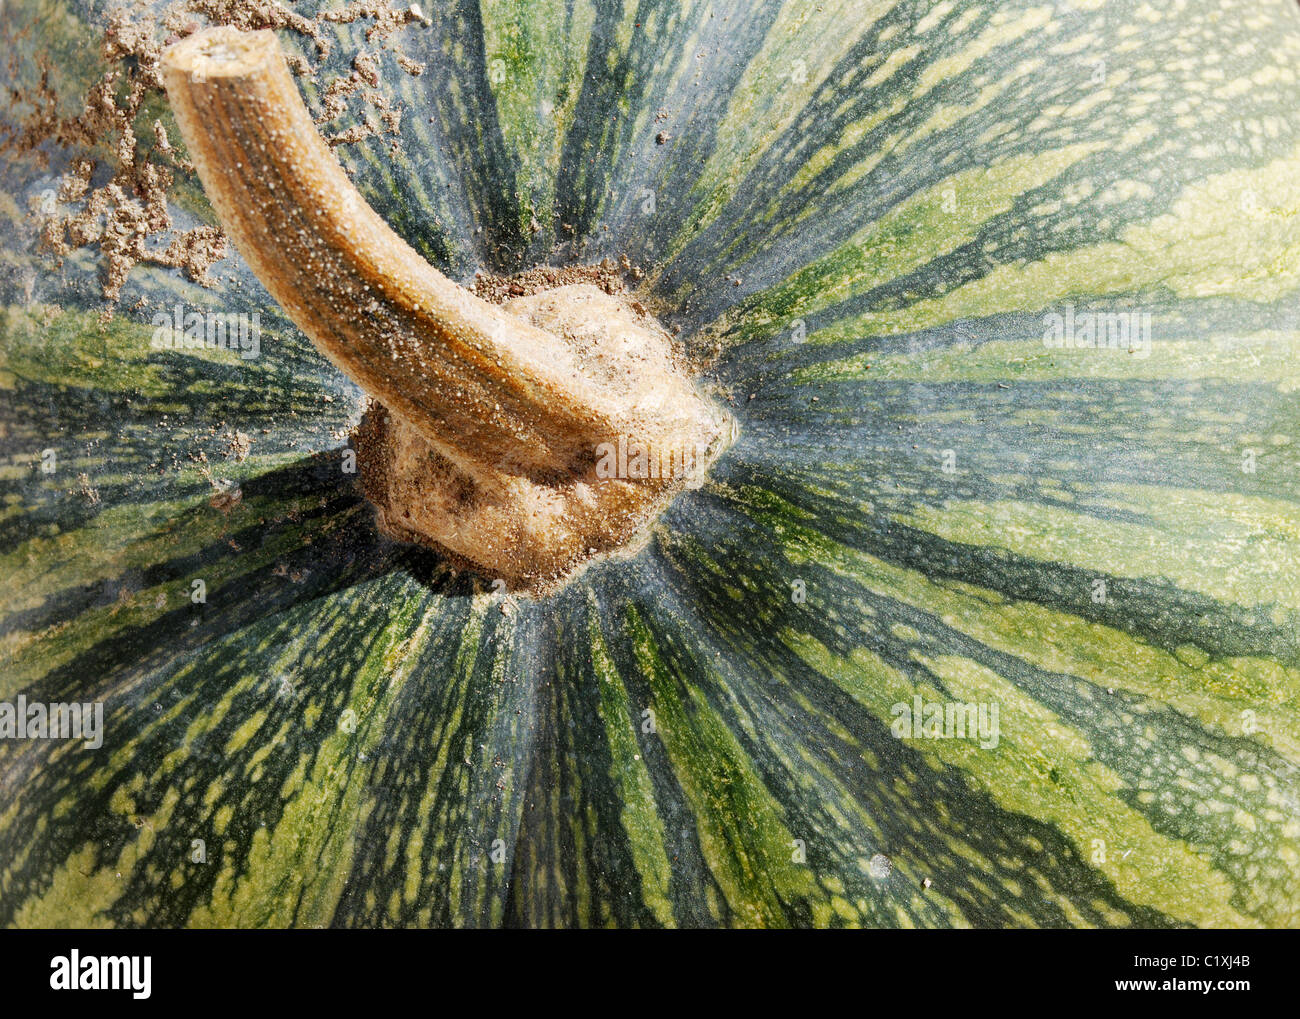 Detail of a large green gourd and it's stalk Stock Photo